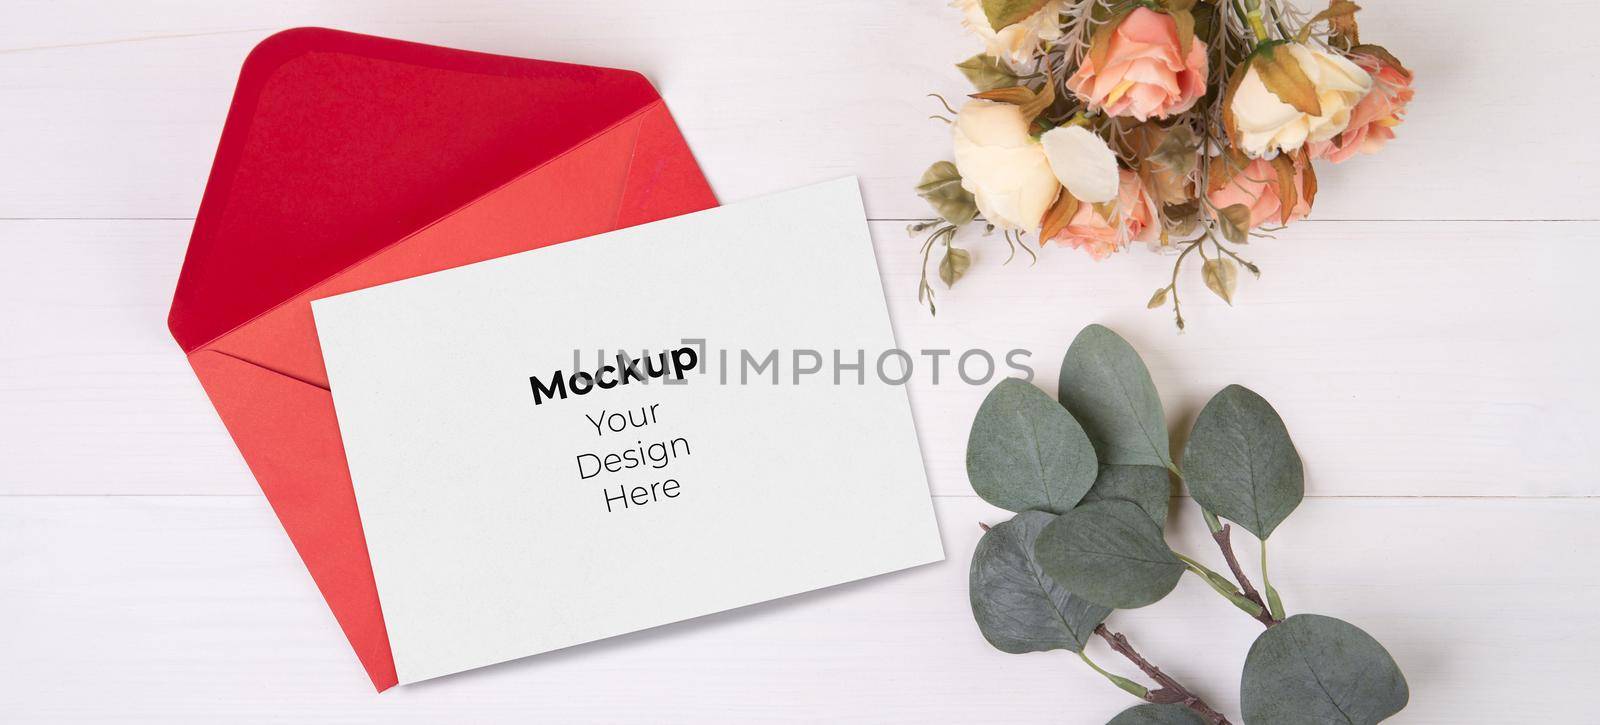 Valentine day, greeting card mockup size a5 and letter and flower on wooden table, postcard blank and letter with romance on desk, present in anniversary and celebration, top view, holiday concept.